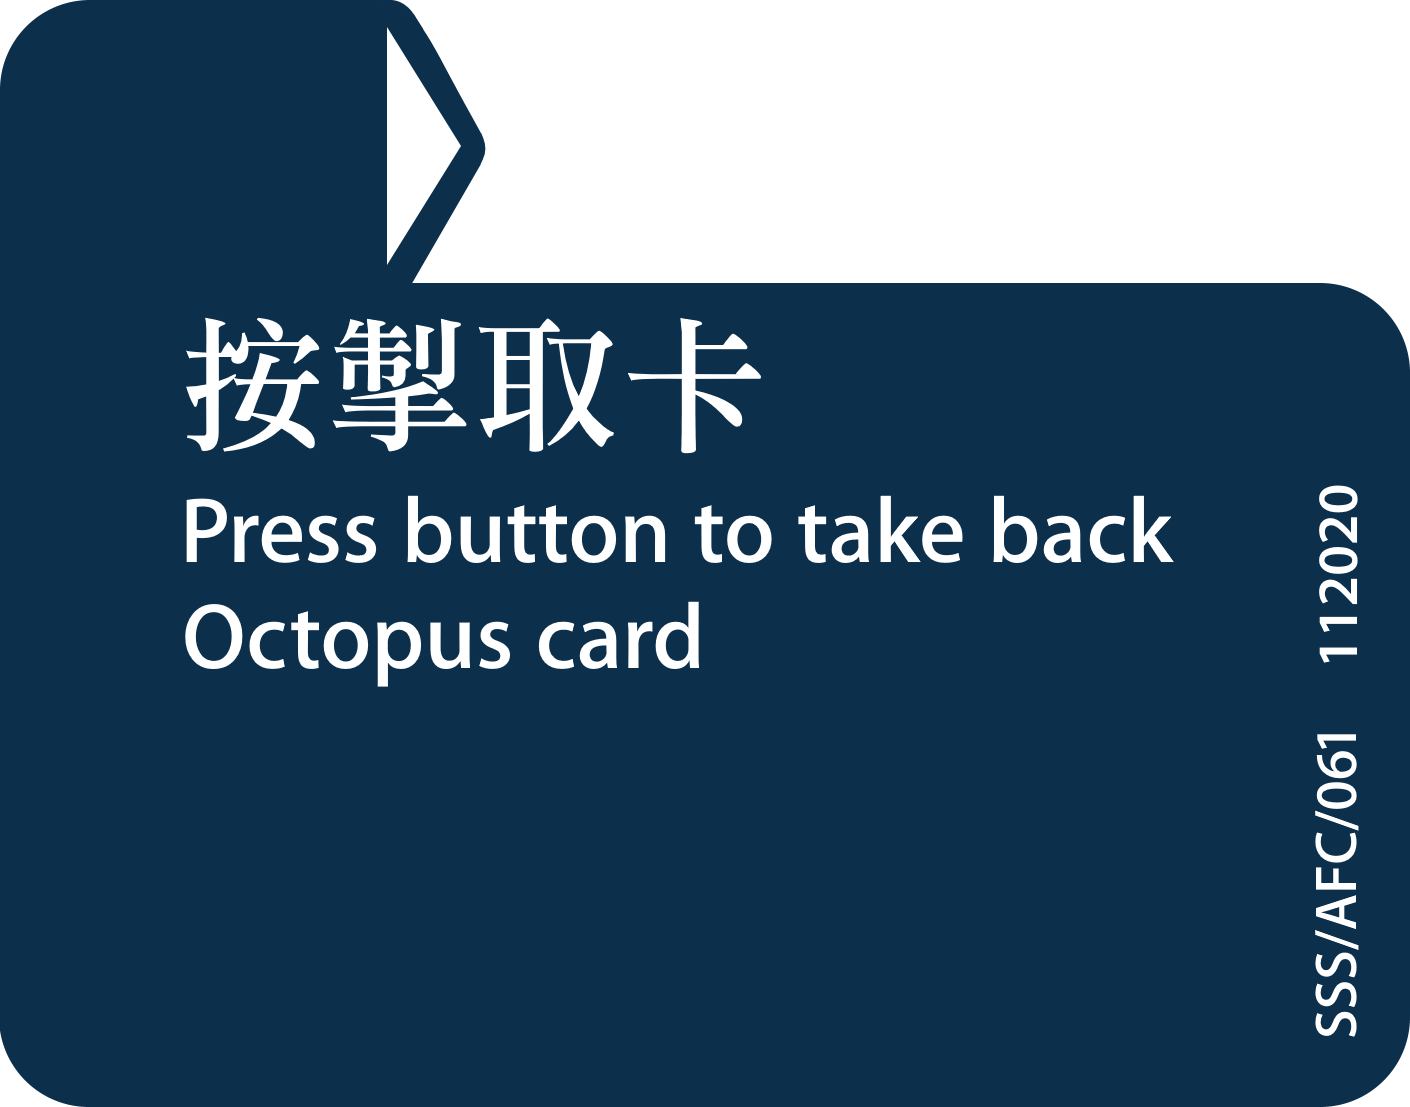 MTR ticket machine - 'Press button to take back Octopus card'